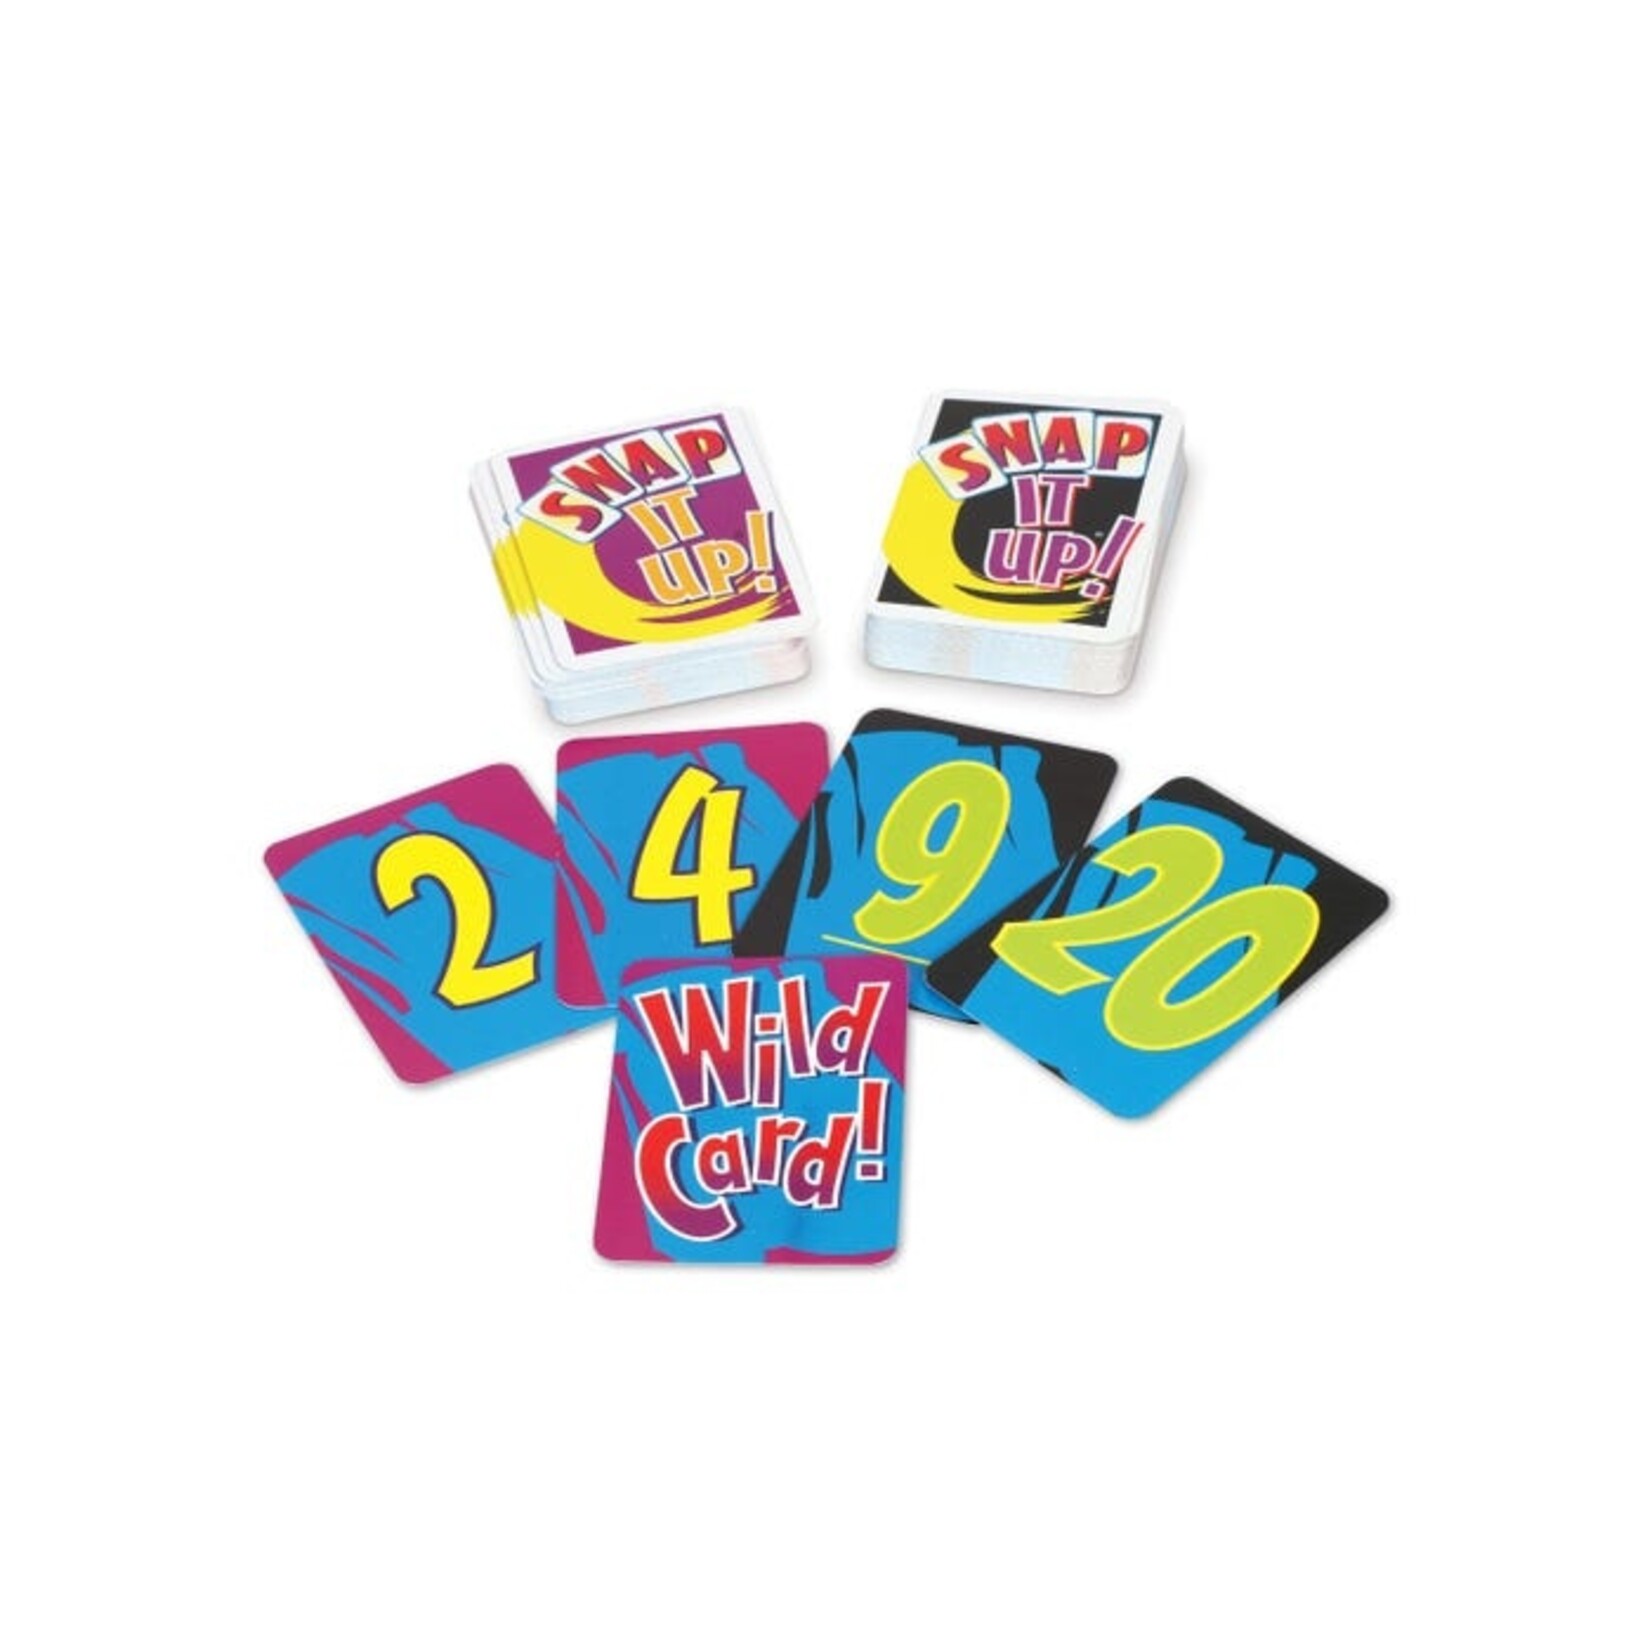 LEARNING RESOURCES INC Snap It Up!® Addition & Subtraction Card Game